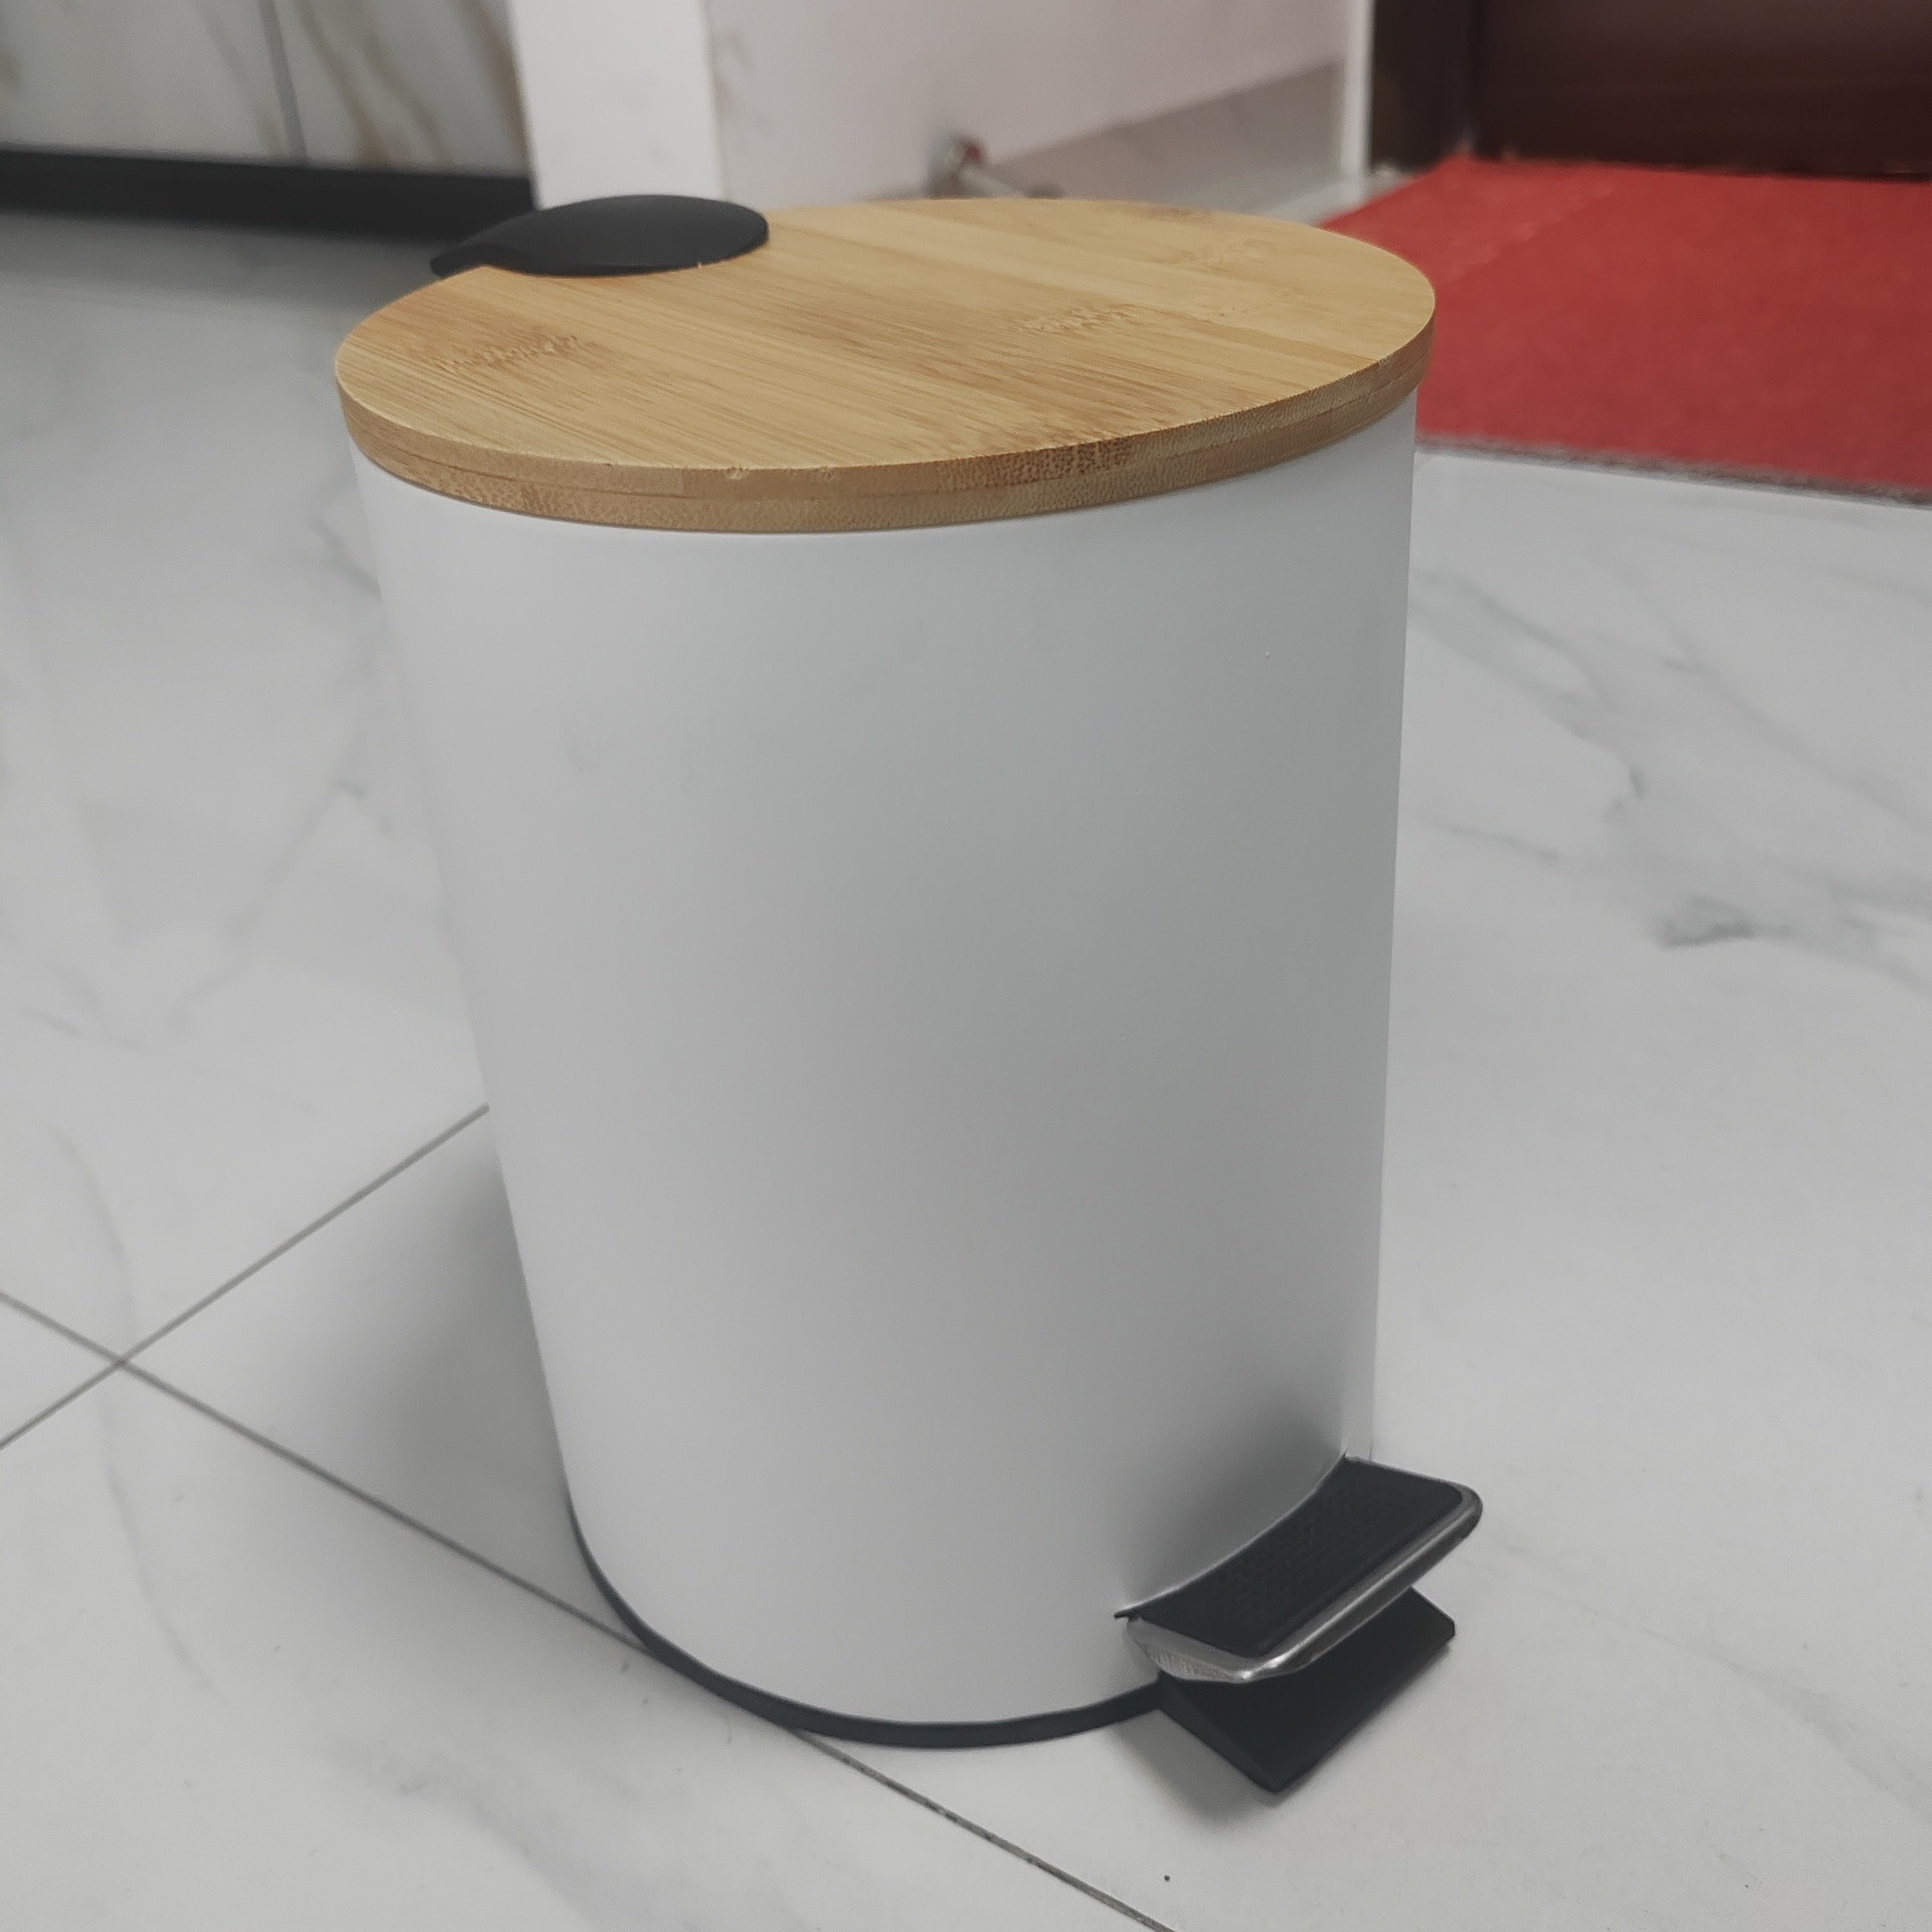 

1pc Round Pedal Trash Can With Bamboo Lid, Stainless Steel, Modern Minimalist Home Waste Bin, Black & White